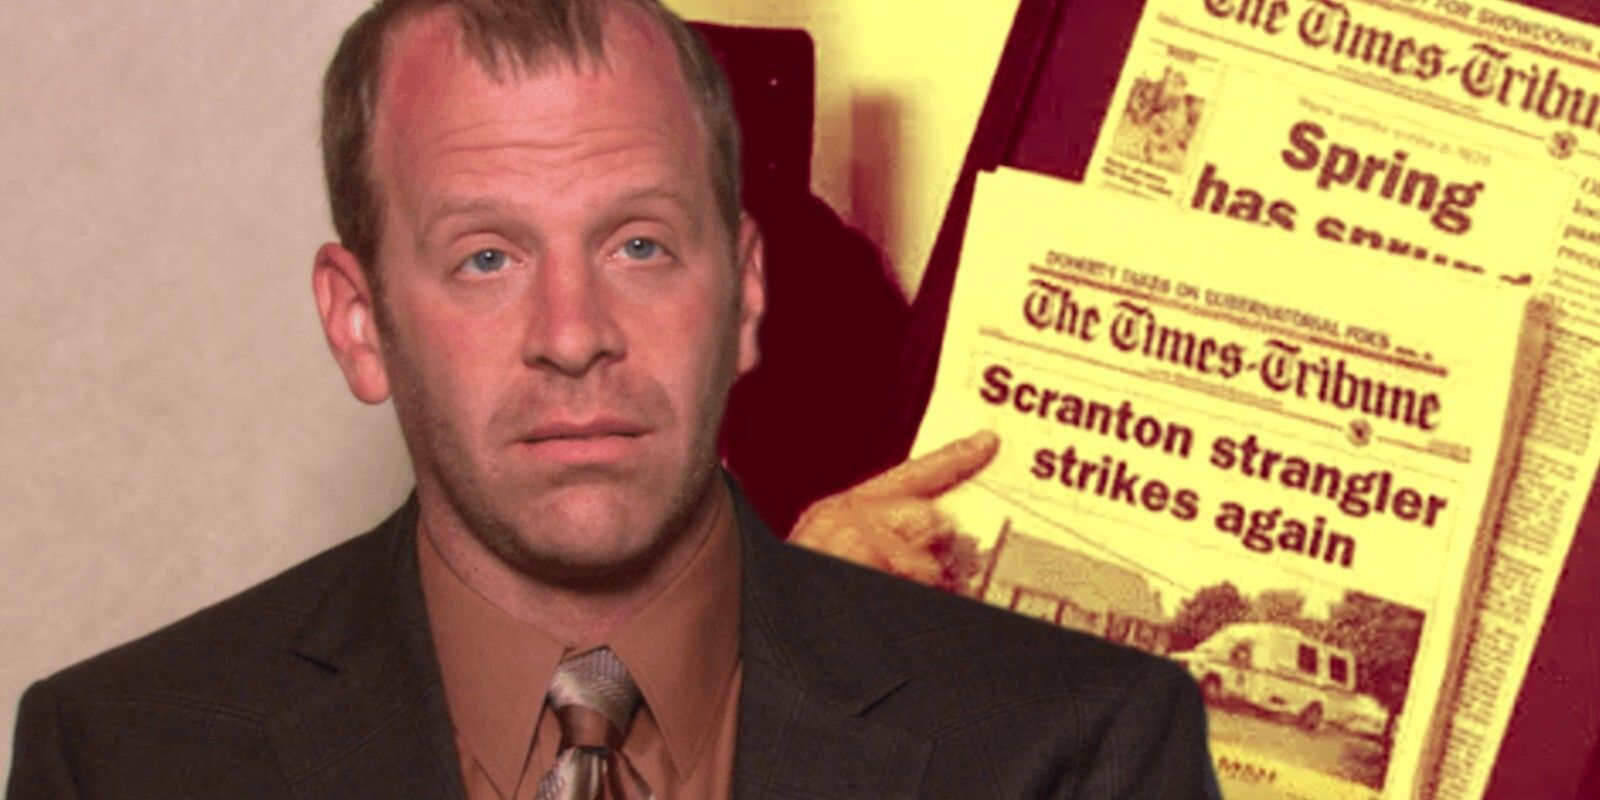 Toby in front of Scranton Strangler newspapers on The Office